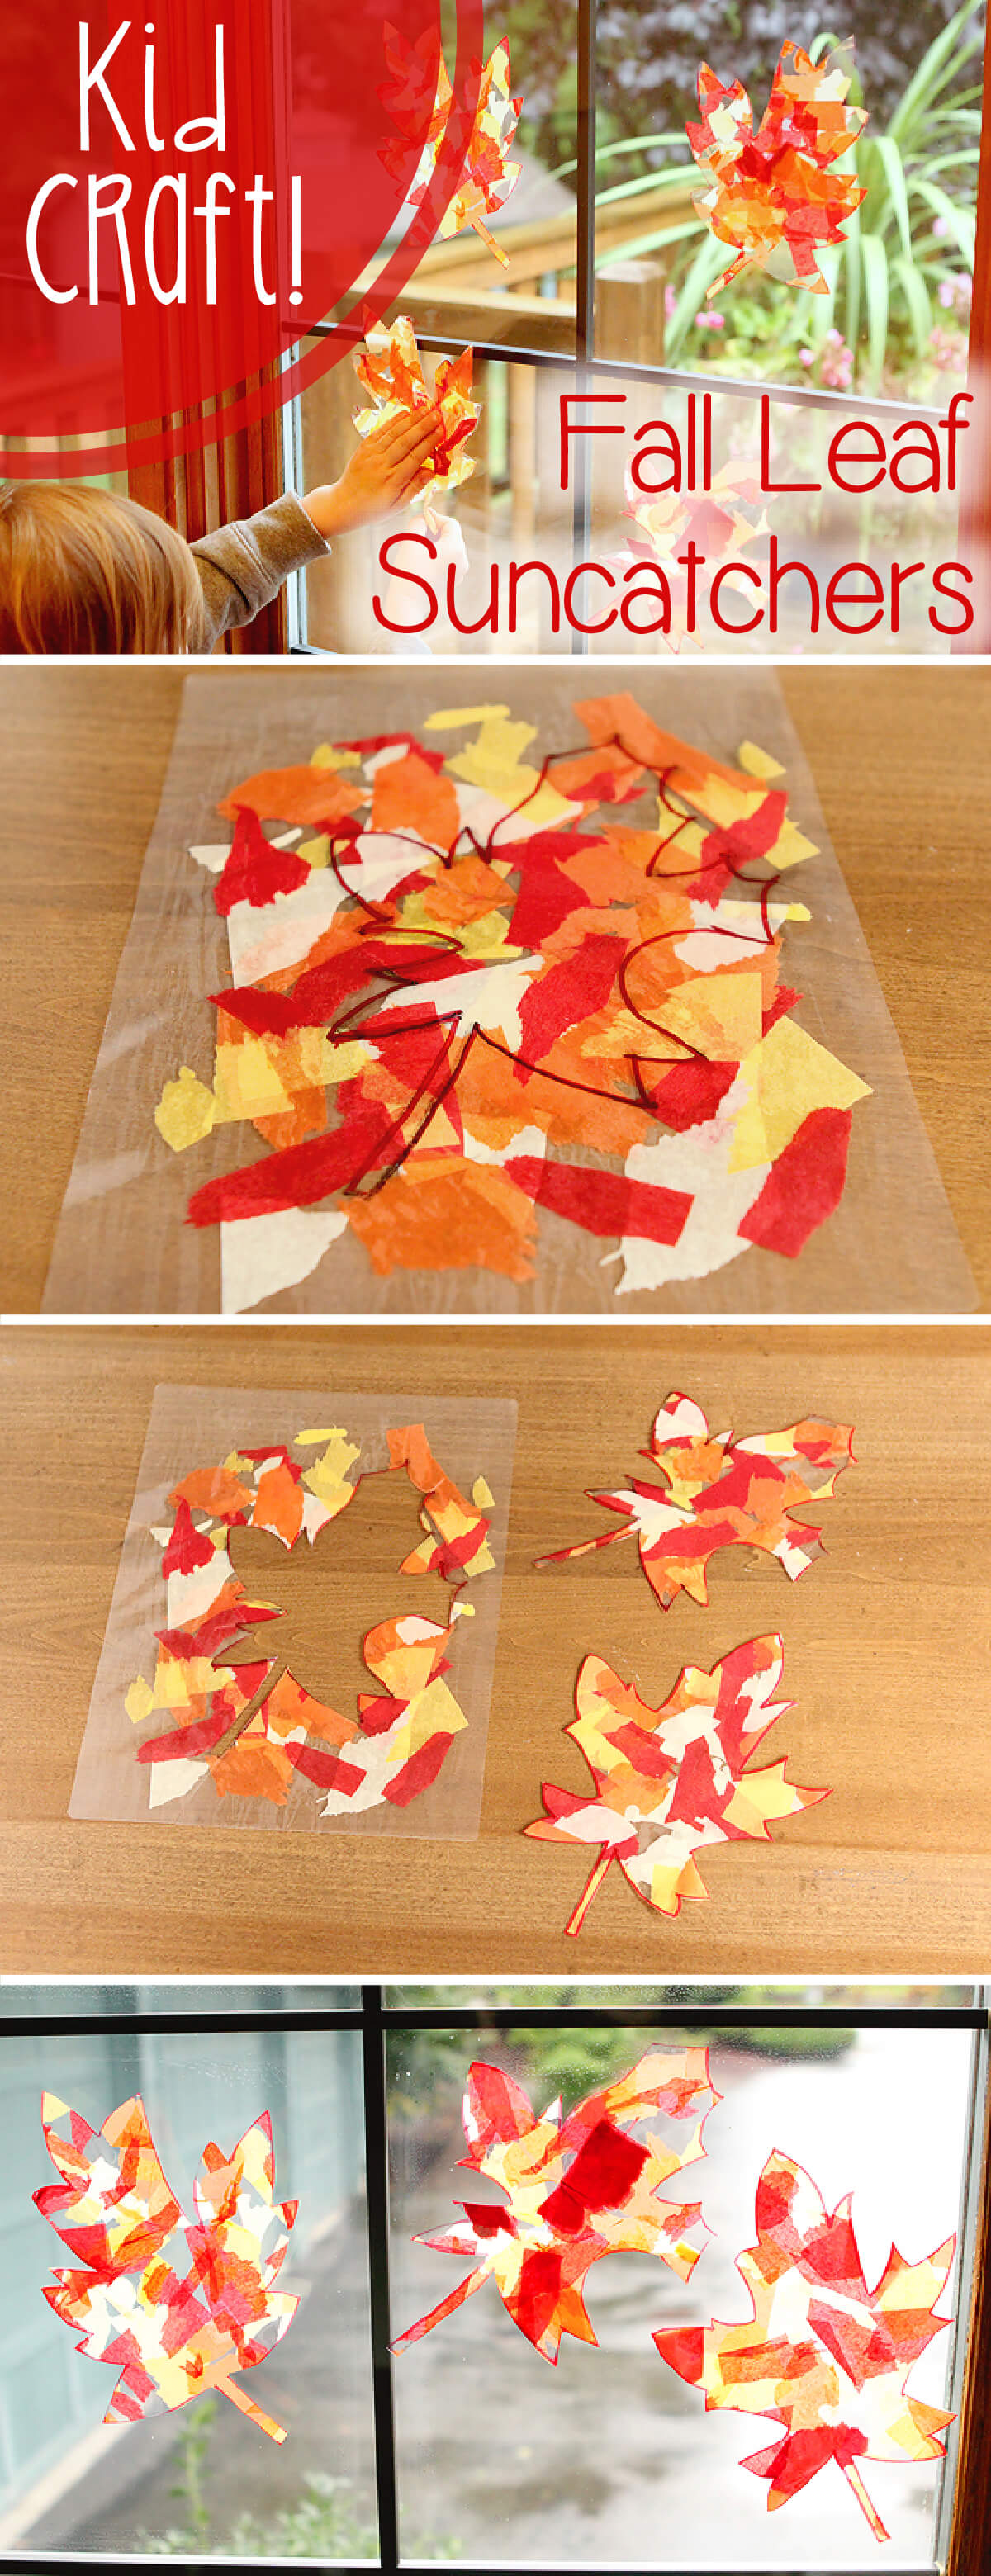 Stained Glass Effect Fall Leaf Suncatchers